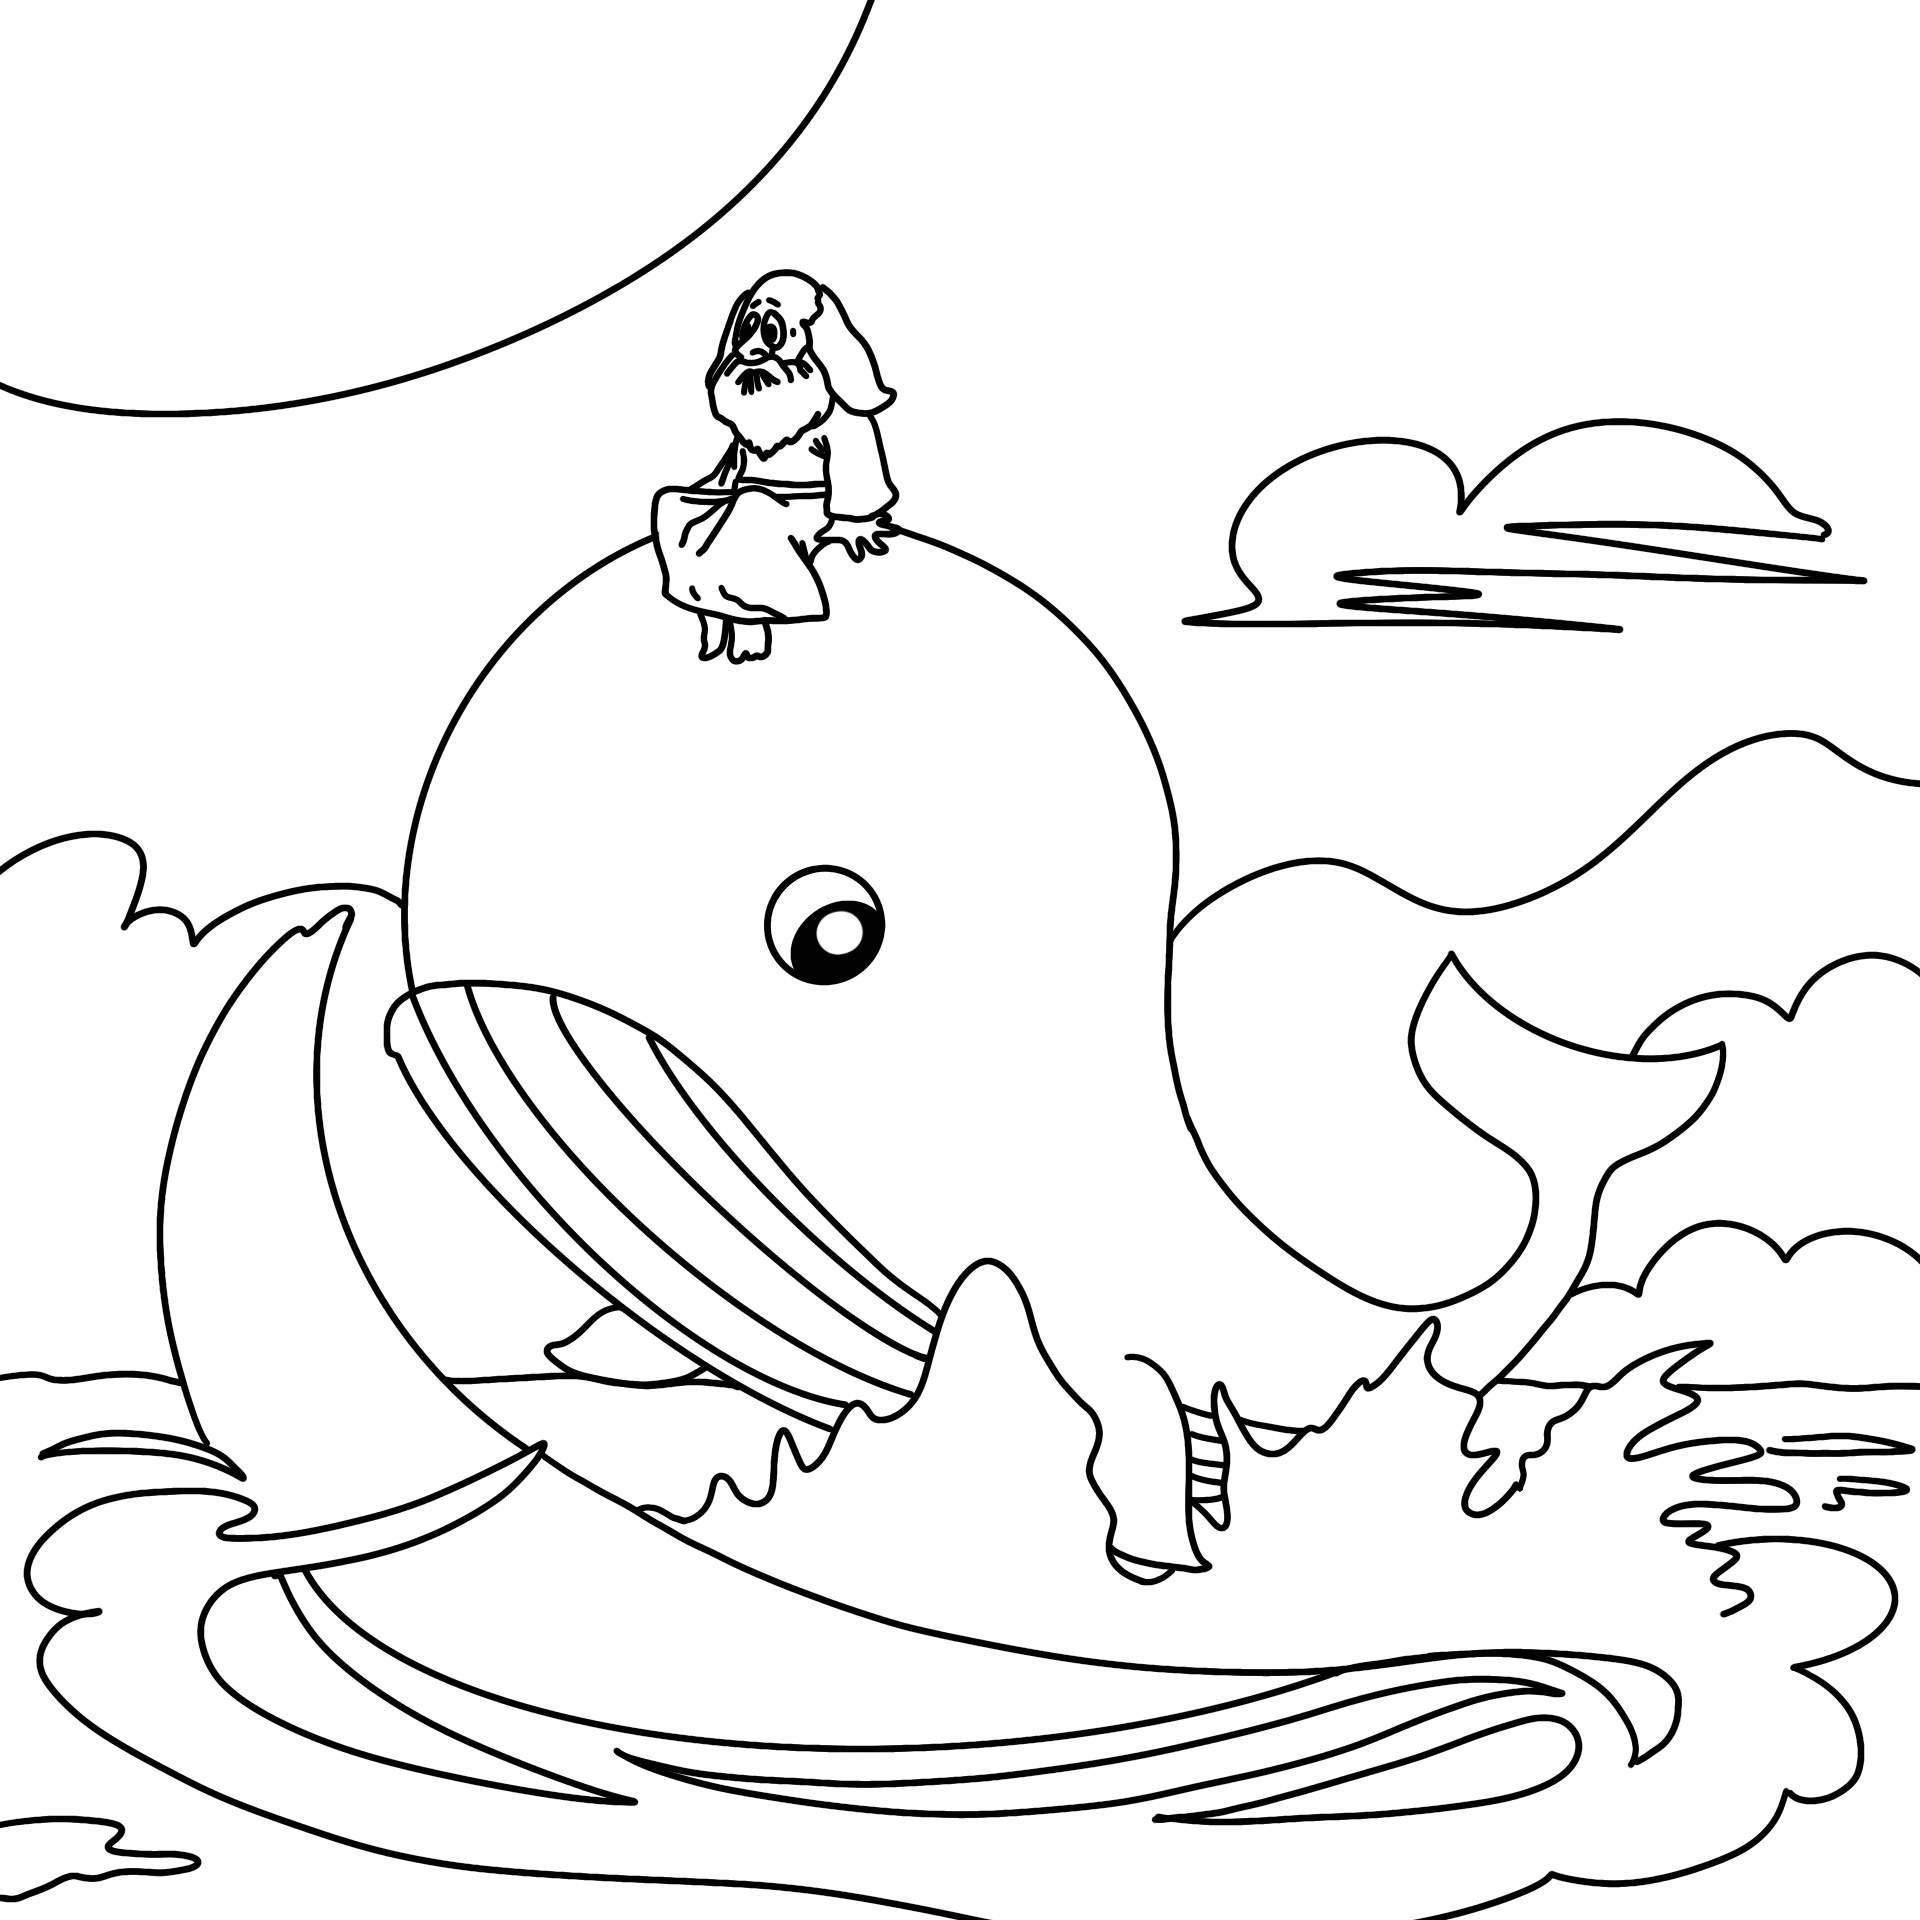 Printable Coloring Page Jonah and the Fish